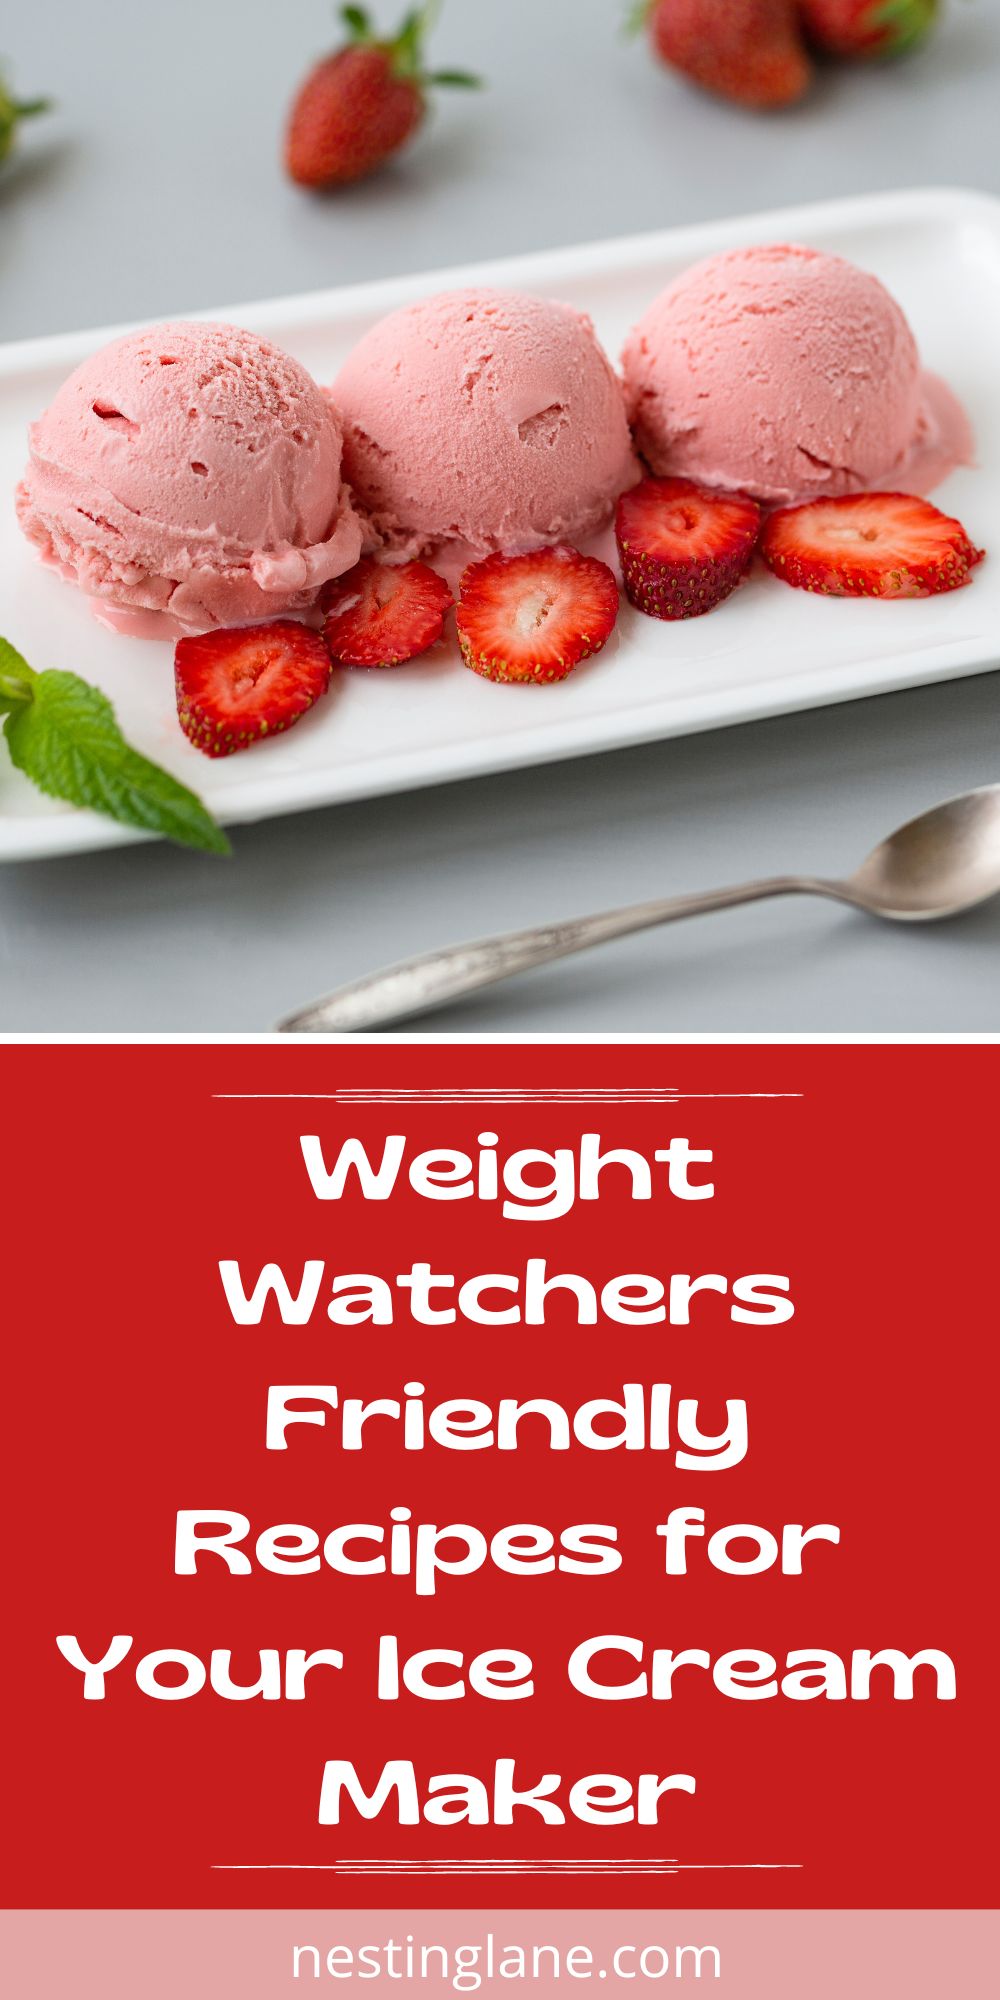 Graphic for Pinterest of Weight Watchers Friendly Recipes for Your Ice Cream Maker.